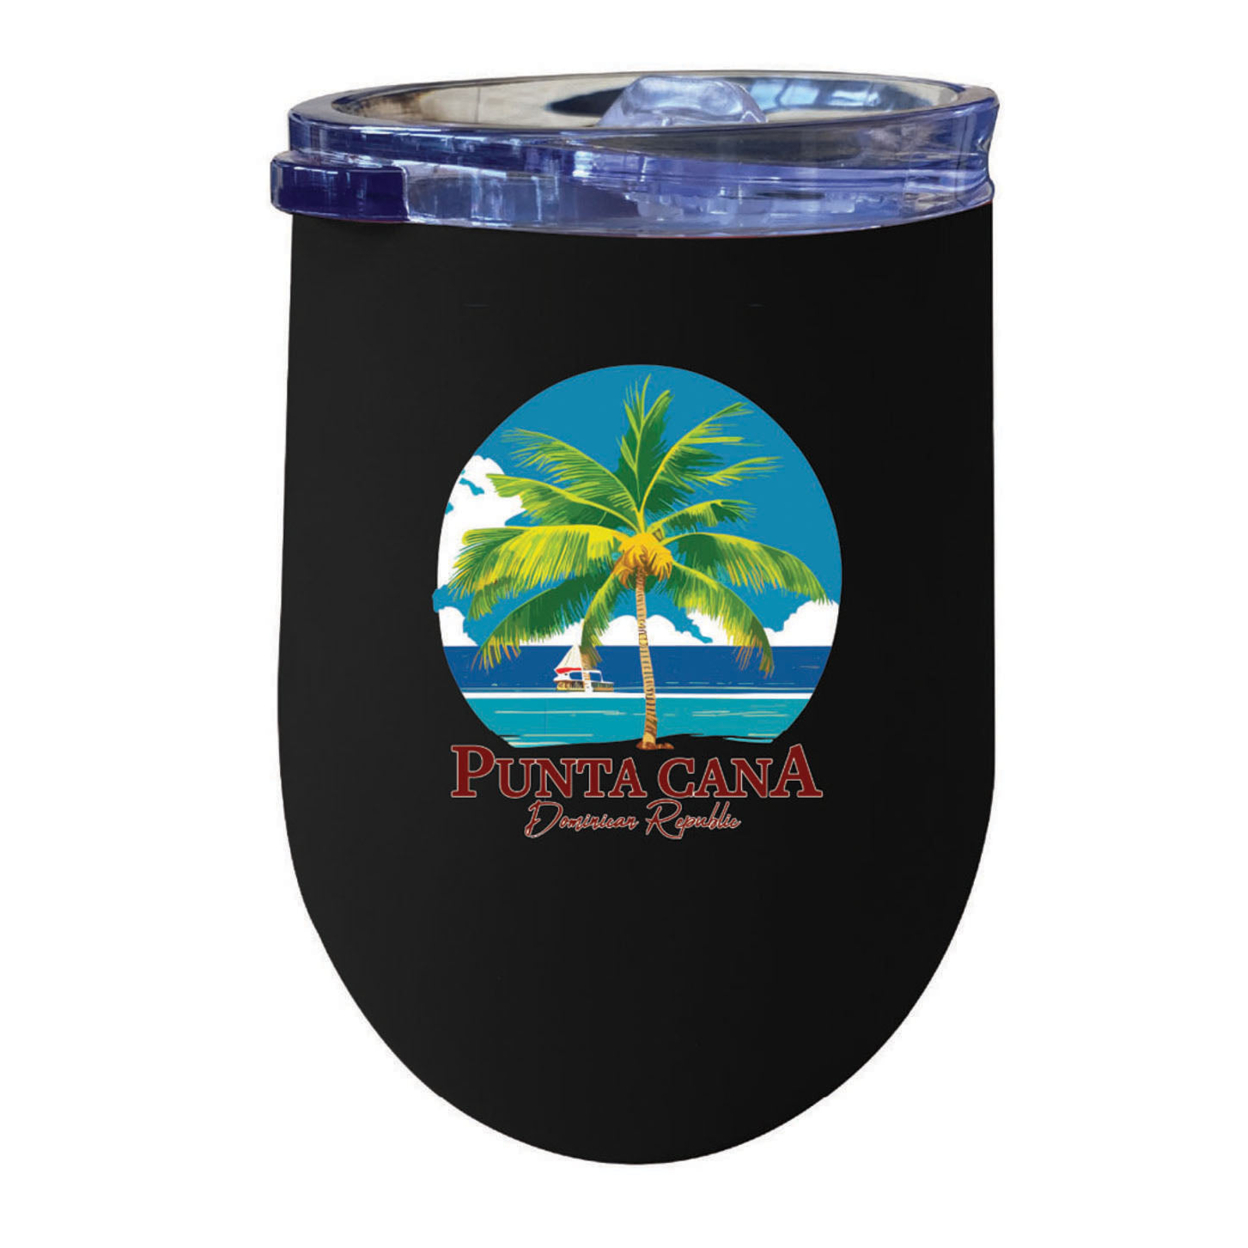 Punta Cana Dominican Republic Souvenir 12 Oz Insulated Wine Stainless Steel Tumbler - Rose Gold, PALM